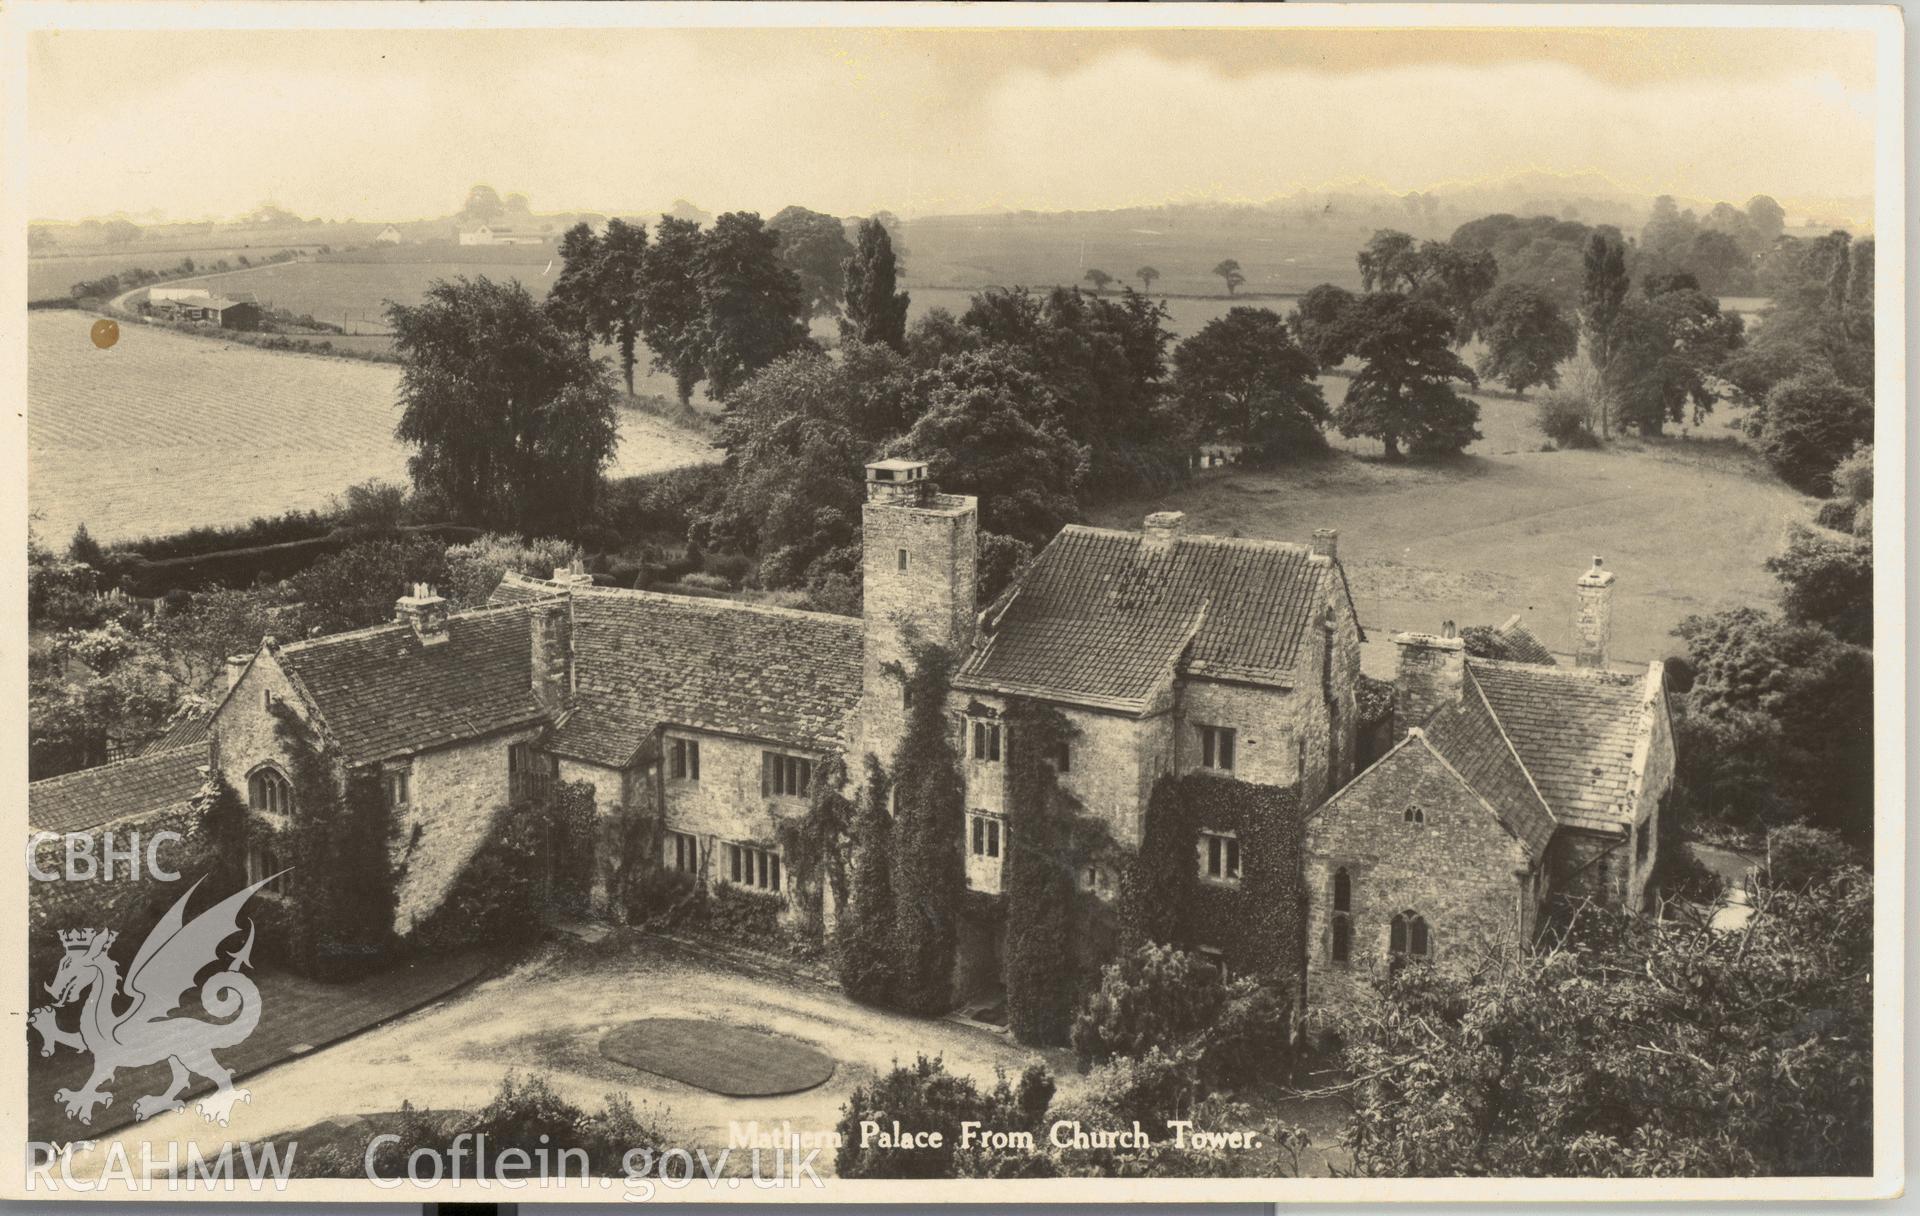 Digitised postcard image of Mathern Palace from church tower, Raphael Tuck and Sons Ltd. Produced by Parks and Gardens Data Services, from an original item in the Peter Davis Collection at Parks and Gardens UK. We hold only web-resolution images of this collection, suitable for viewing on screen and for research purposes only. We do not hold the original images, or publication quality scans.